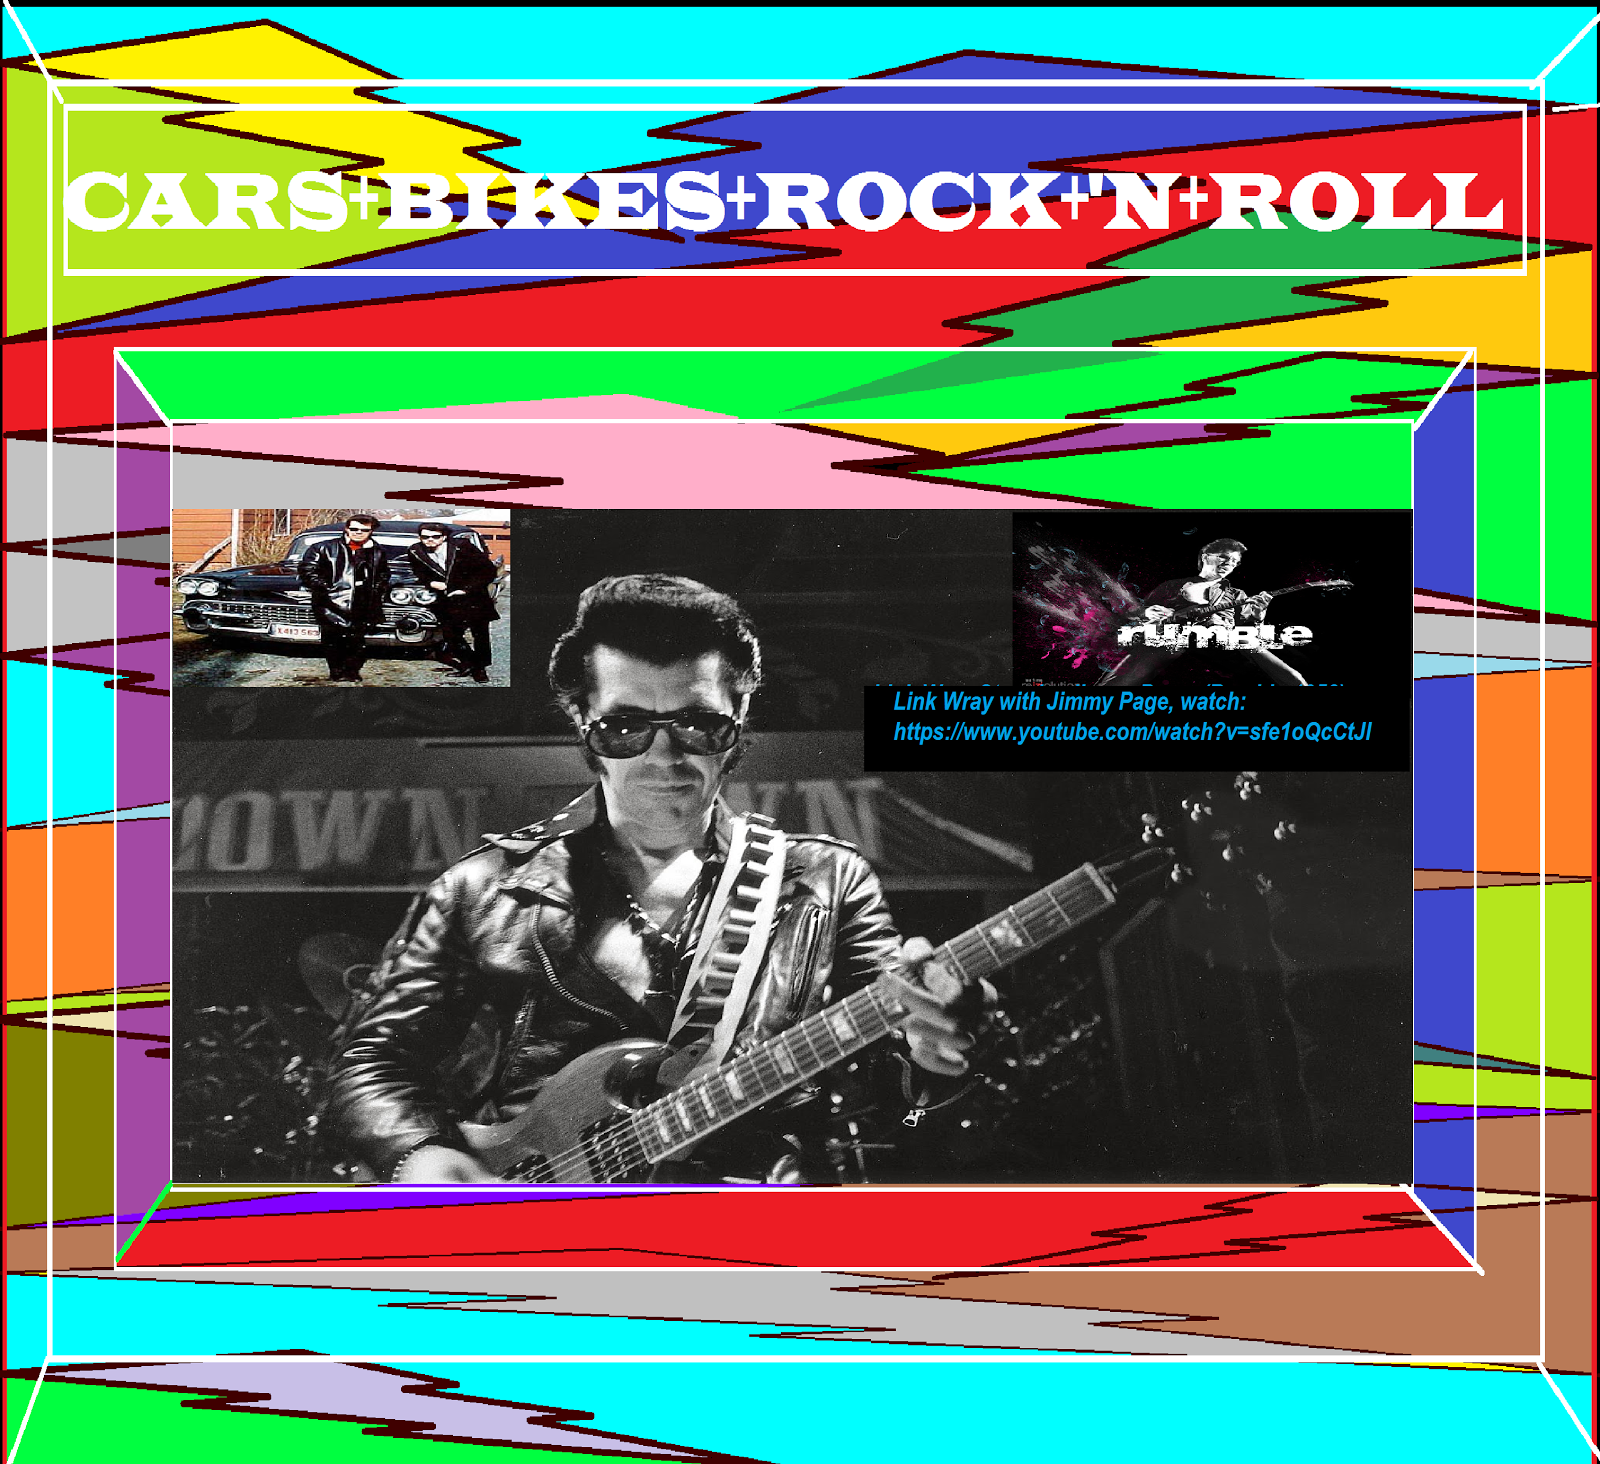 LINK WRAY BY CARS+BIKES+ROCK+'N+ROLL on OneDrive.